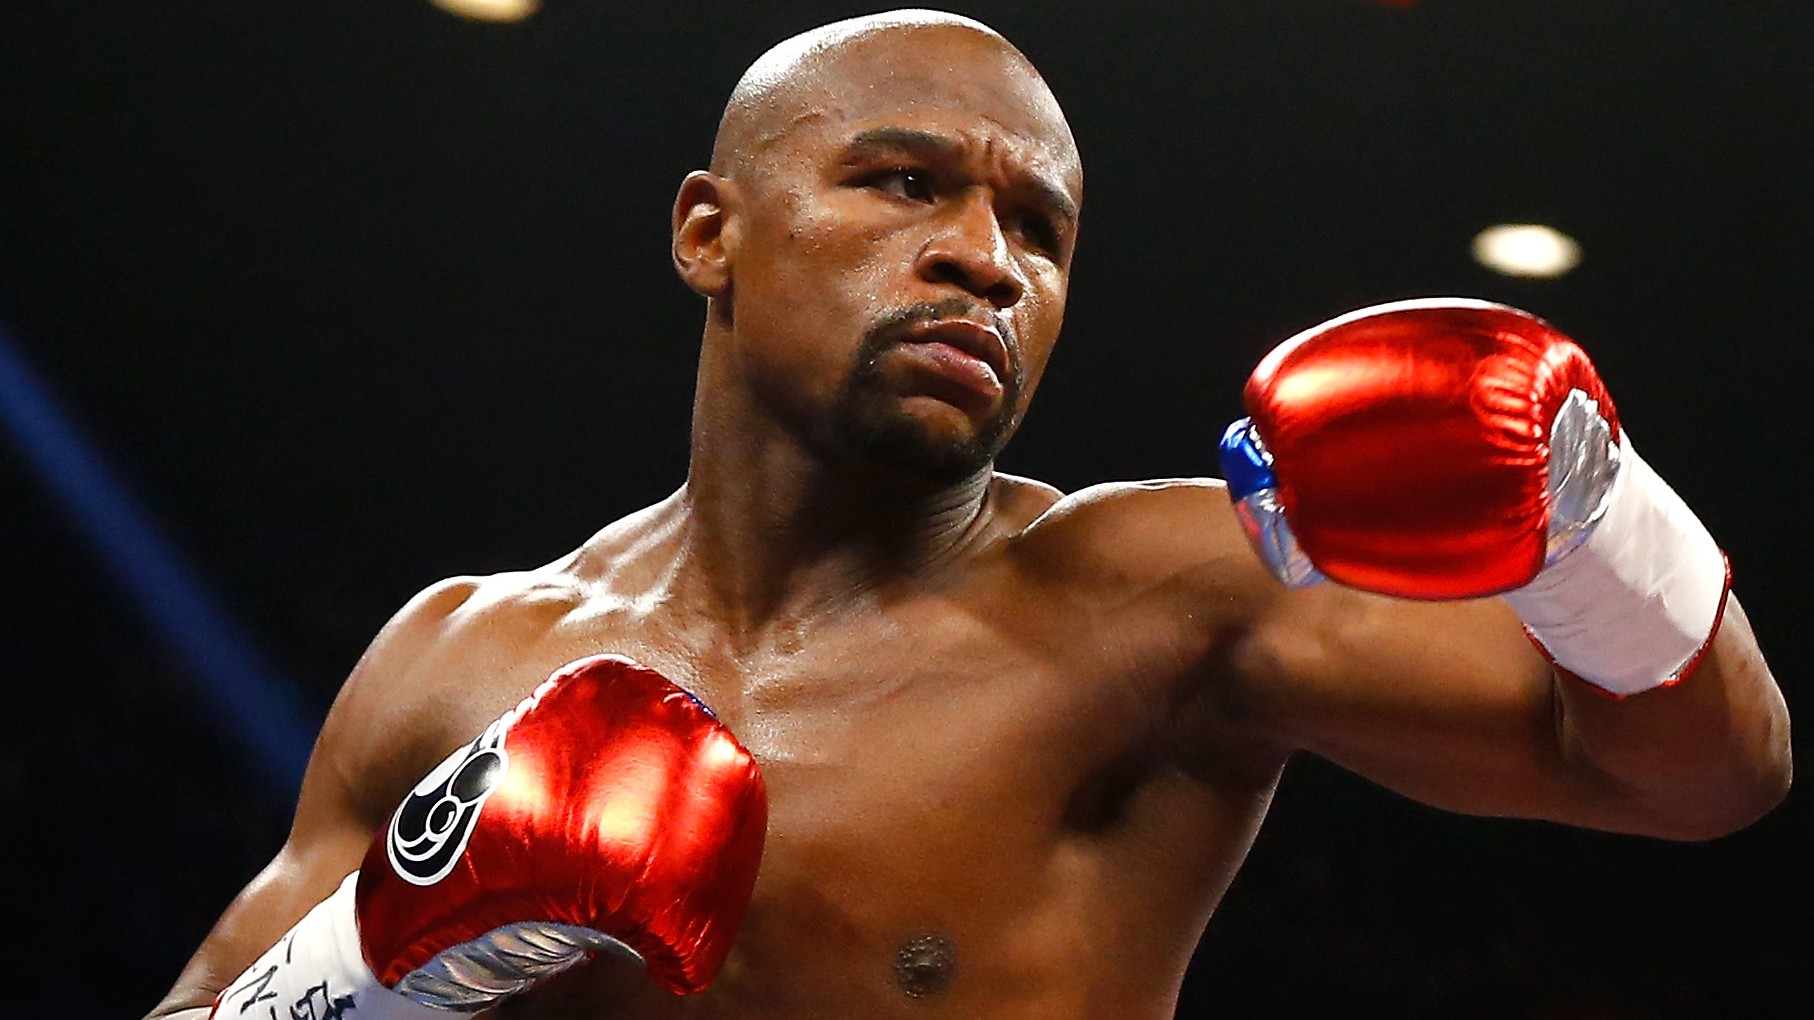 Floyd Mayweather is Now Worth More than $300 Million